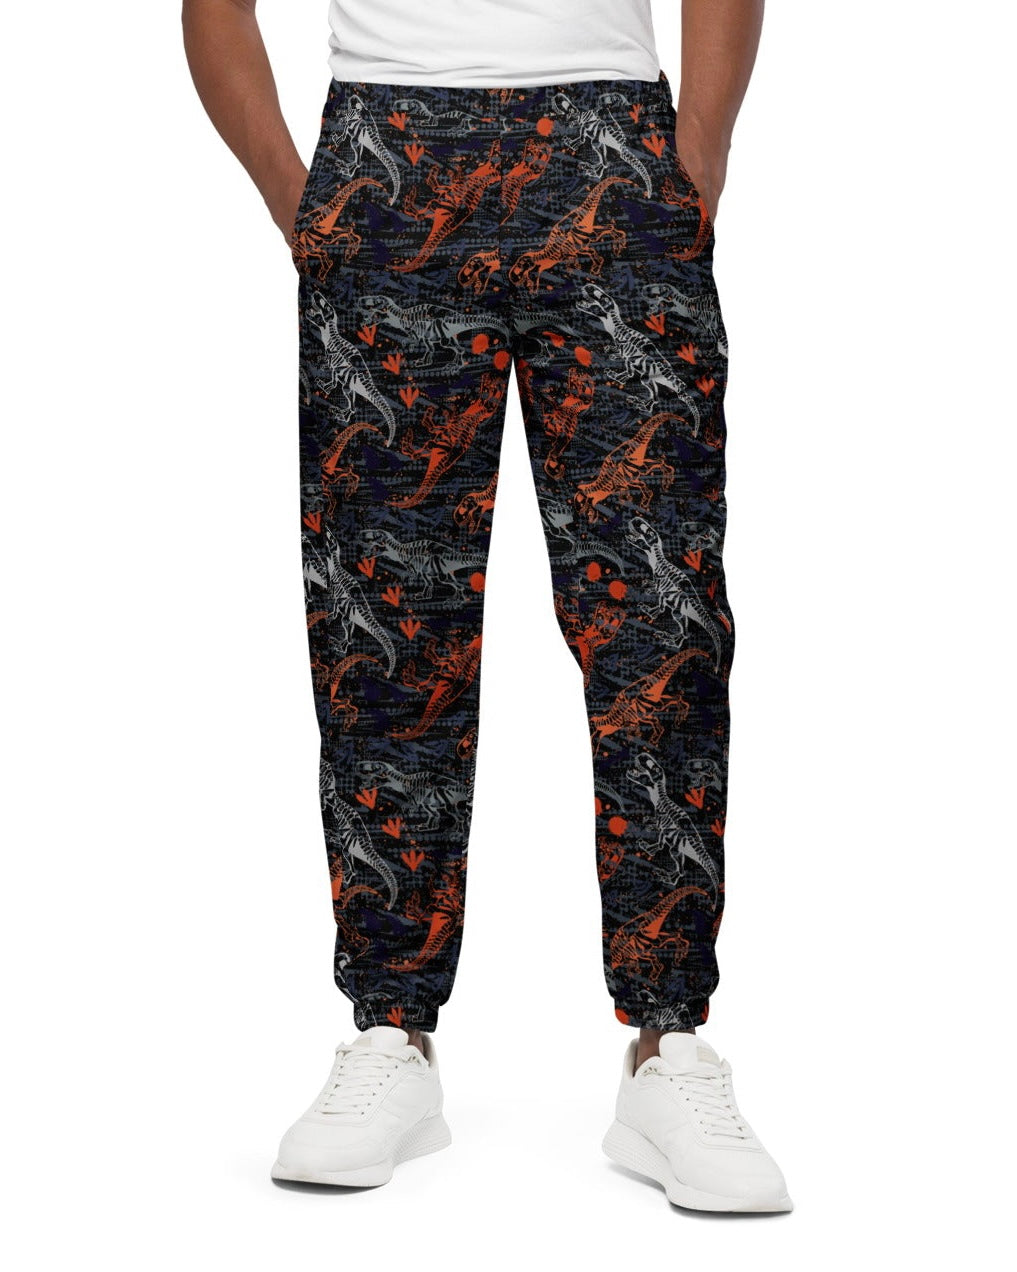 Front view of model wearing One Stop Rave's T-Wrecked Unisex Track Pants, showing off the dynamic dinosaur print.